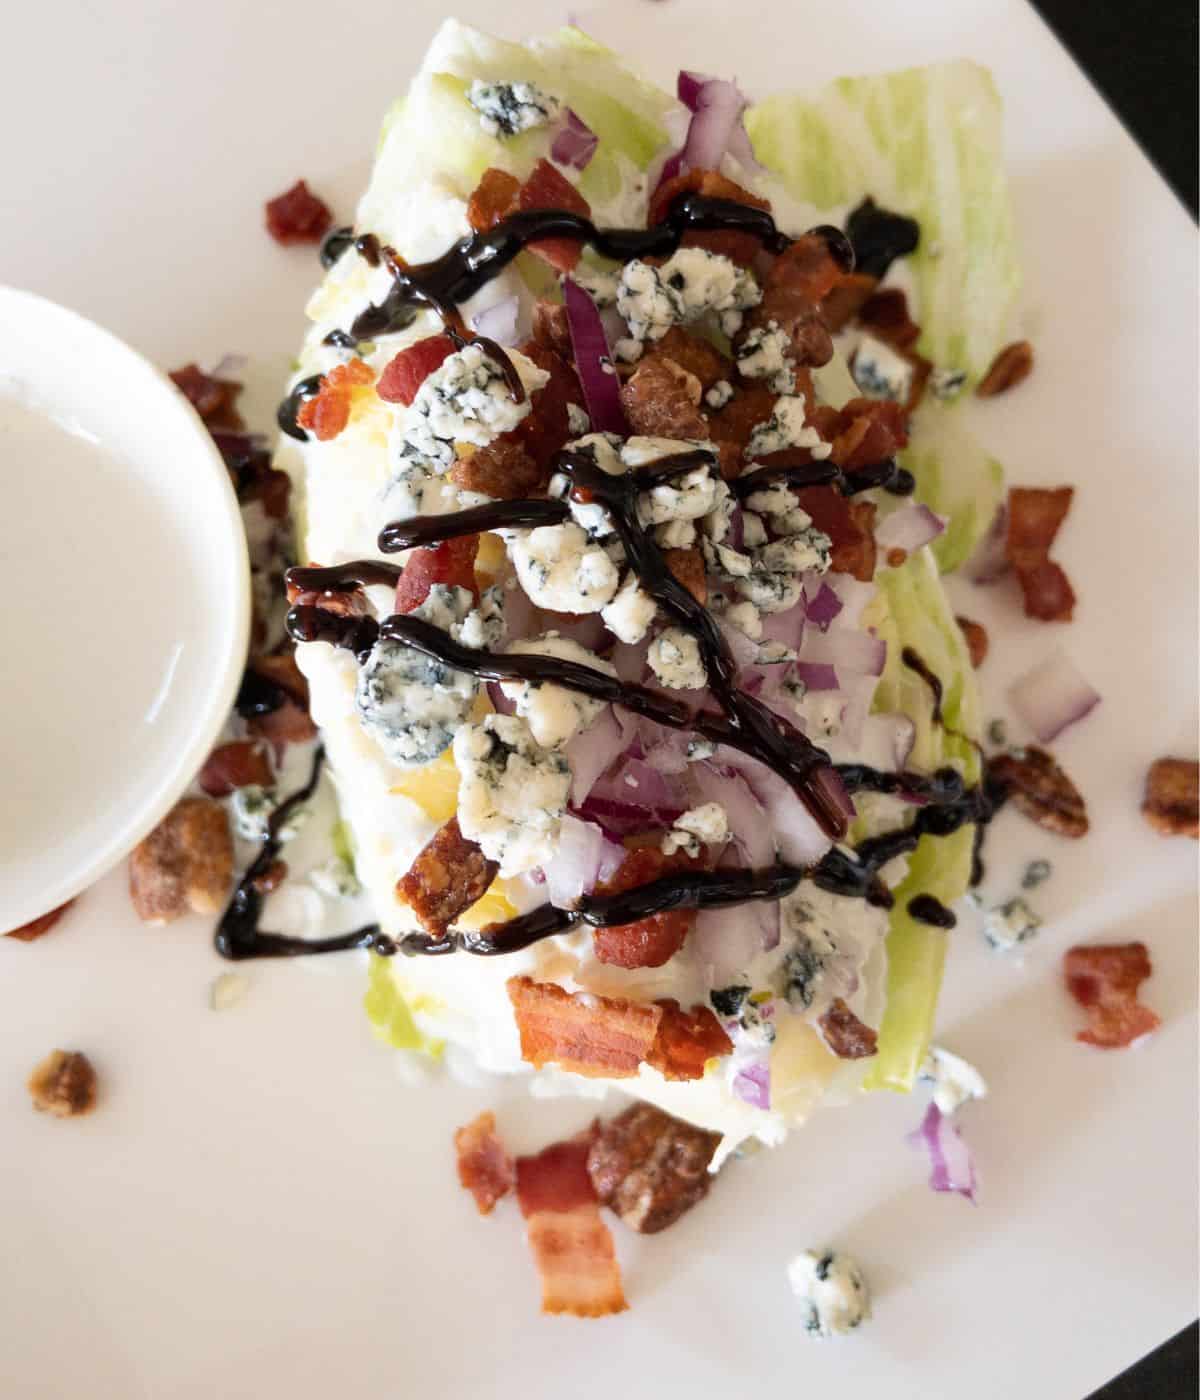 steakhouse wedge salad covered with blue cheese and balsamic glaze on white plate